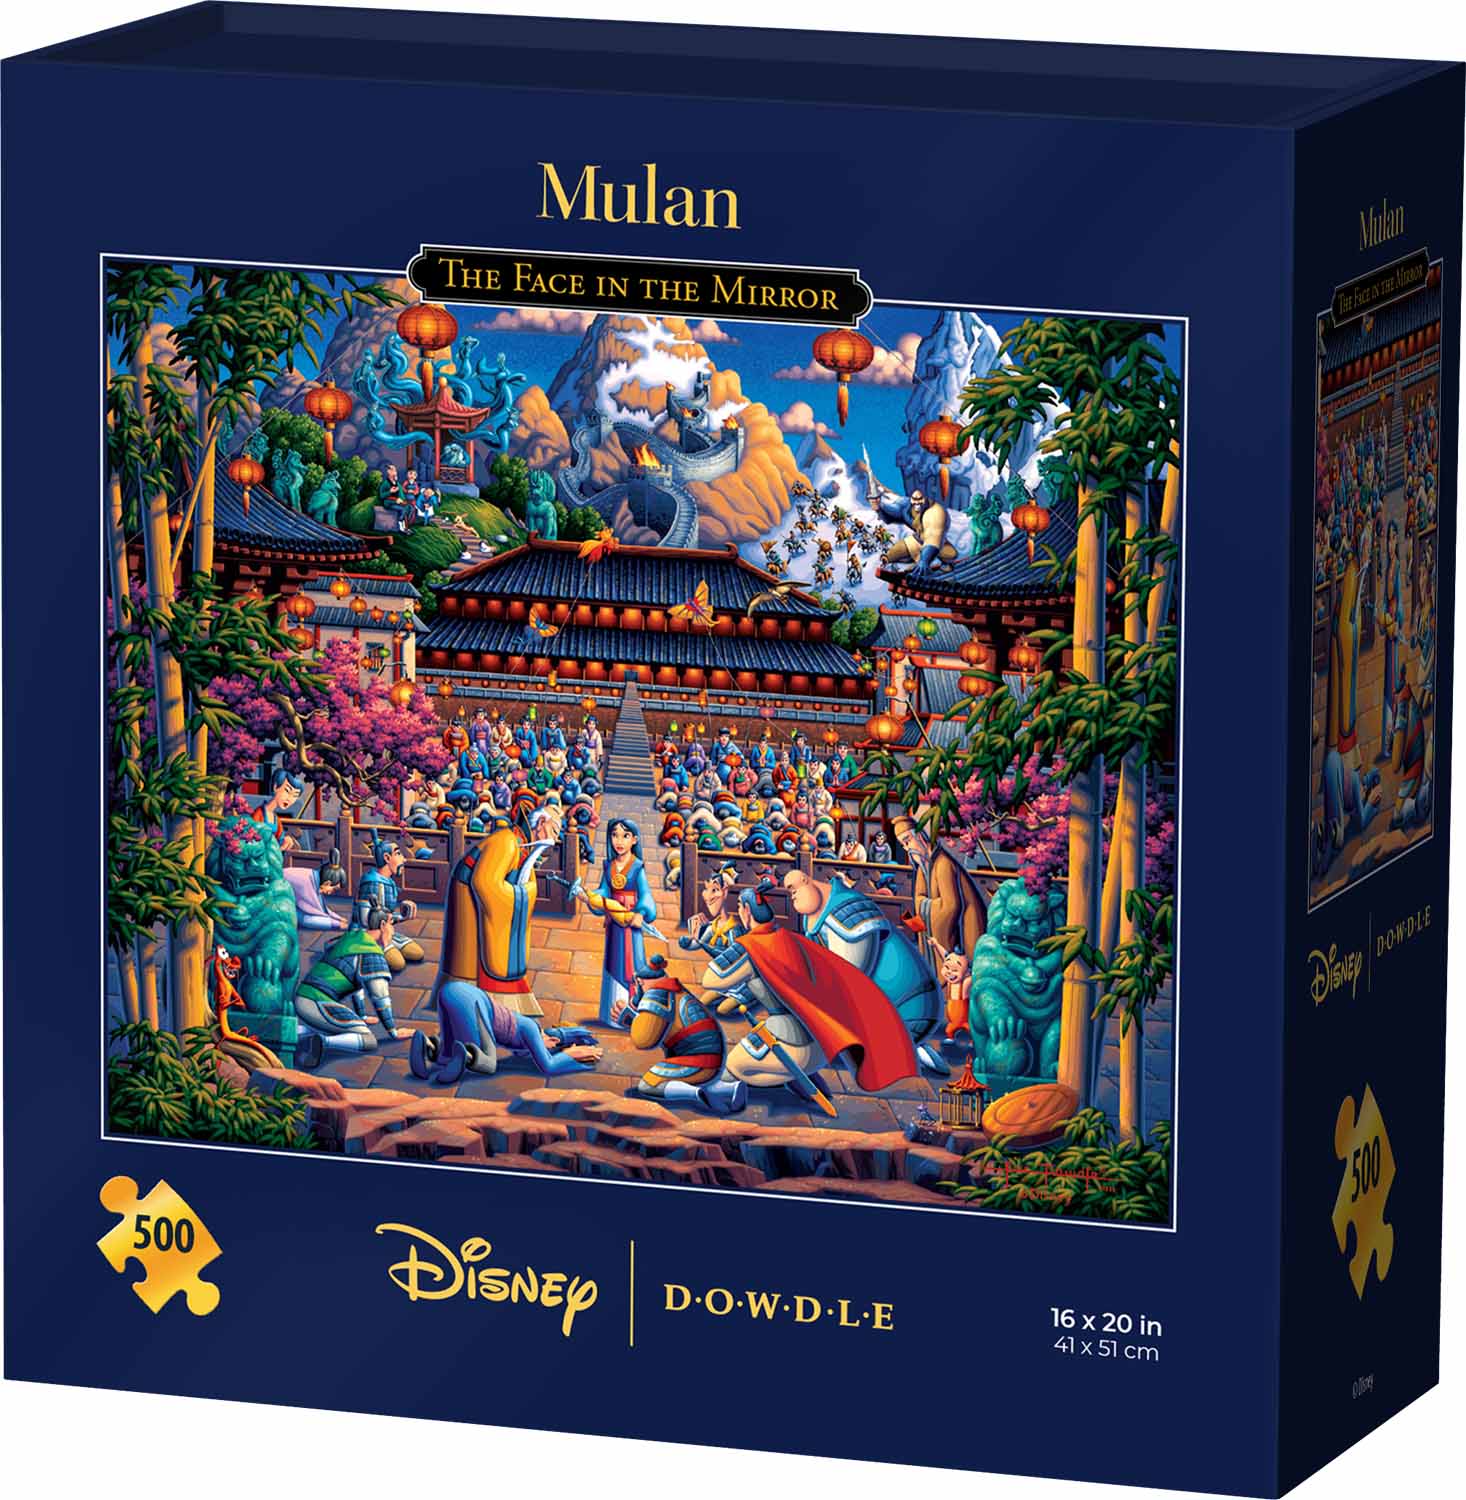 Mulan The Face in the Mirror Disney Jigsaw Puzzle